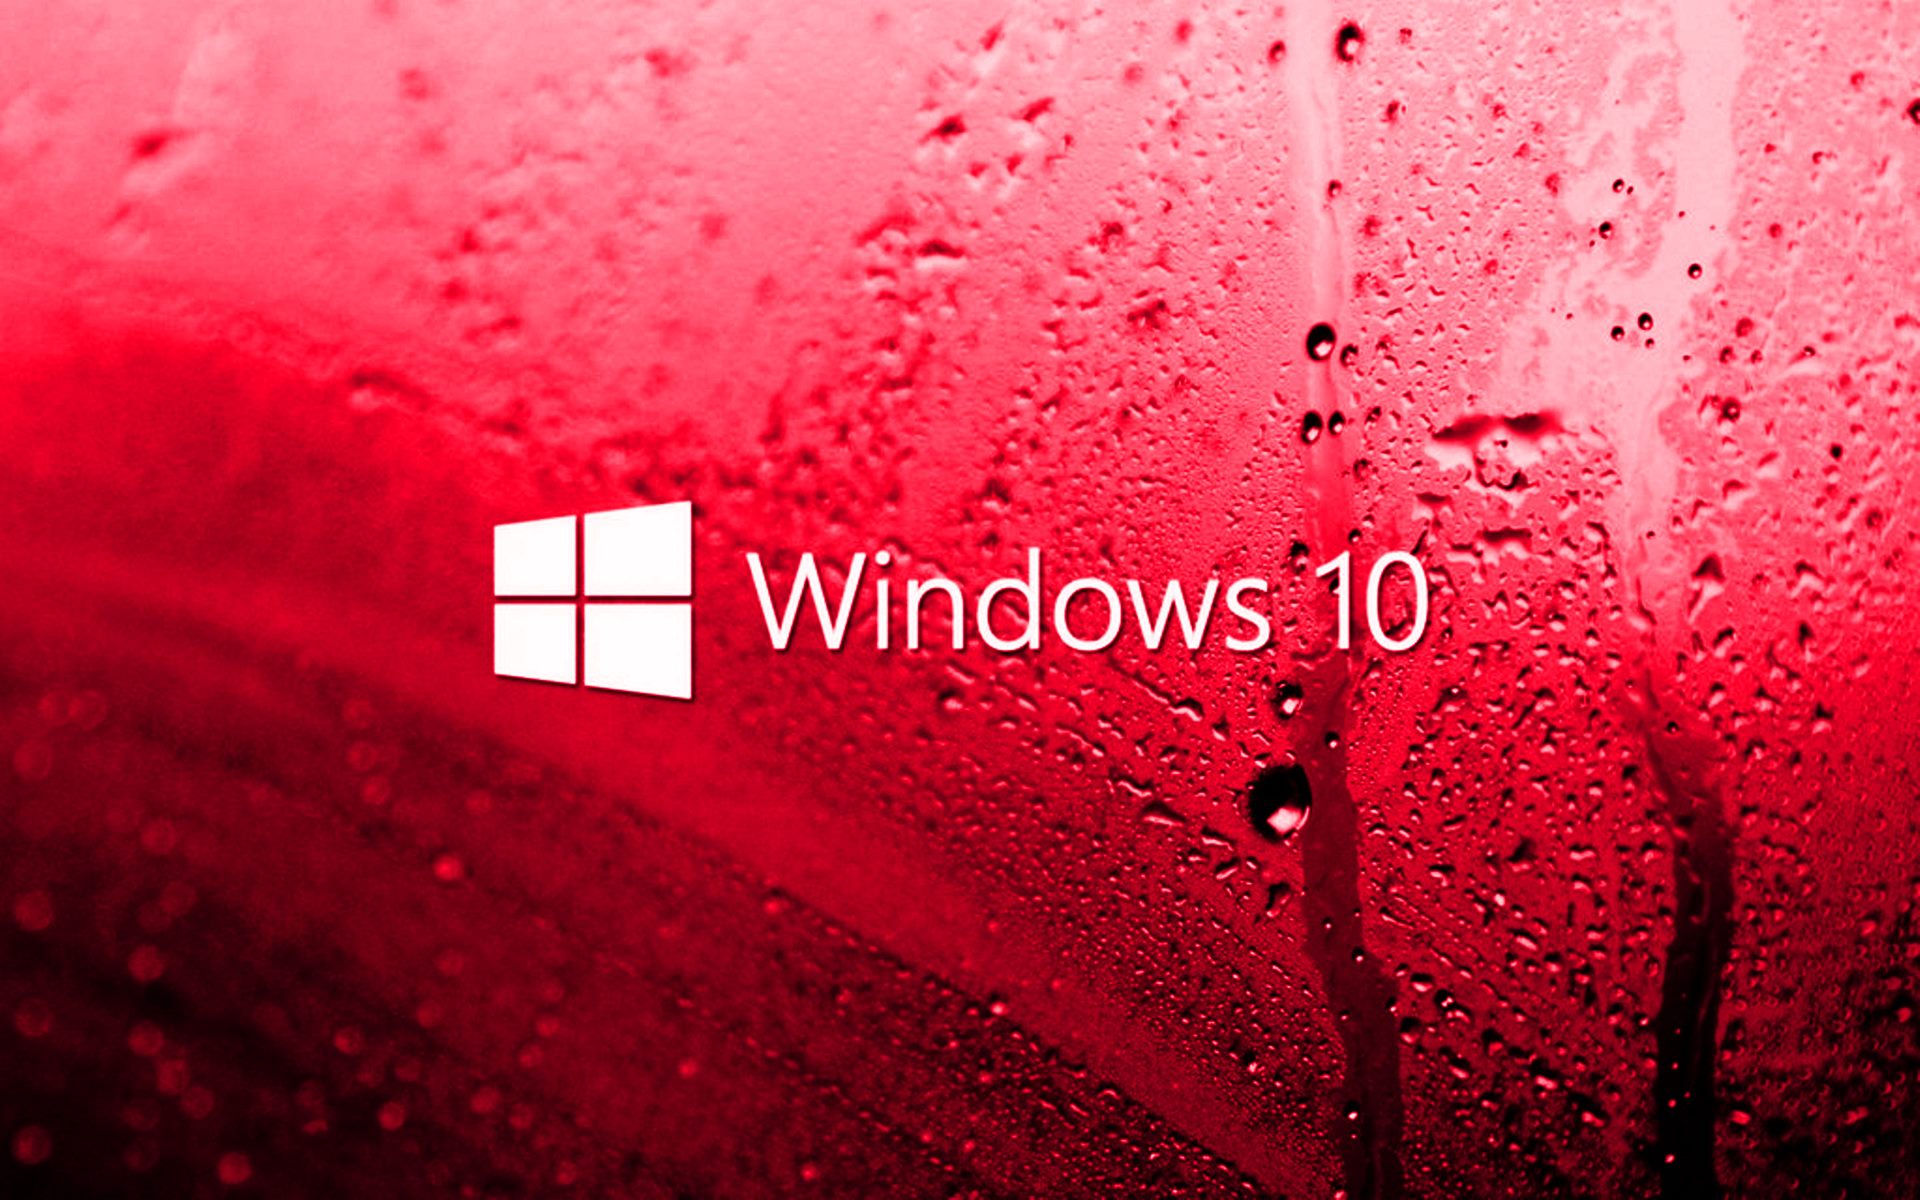 windows 10 mail backgroung images download